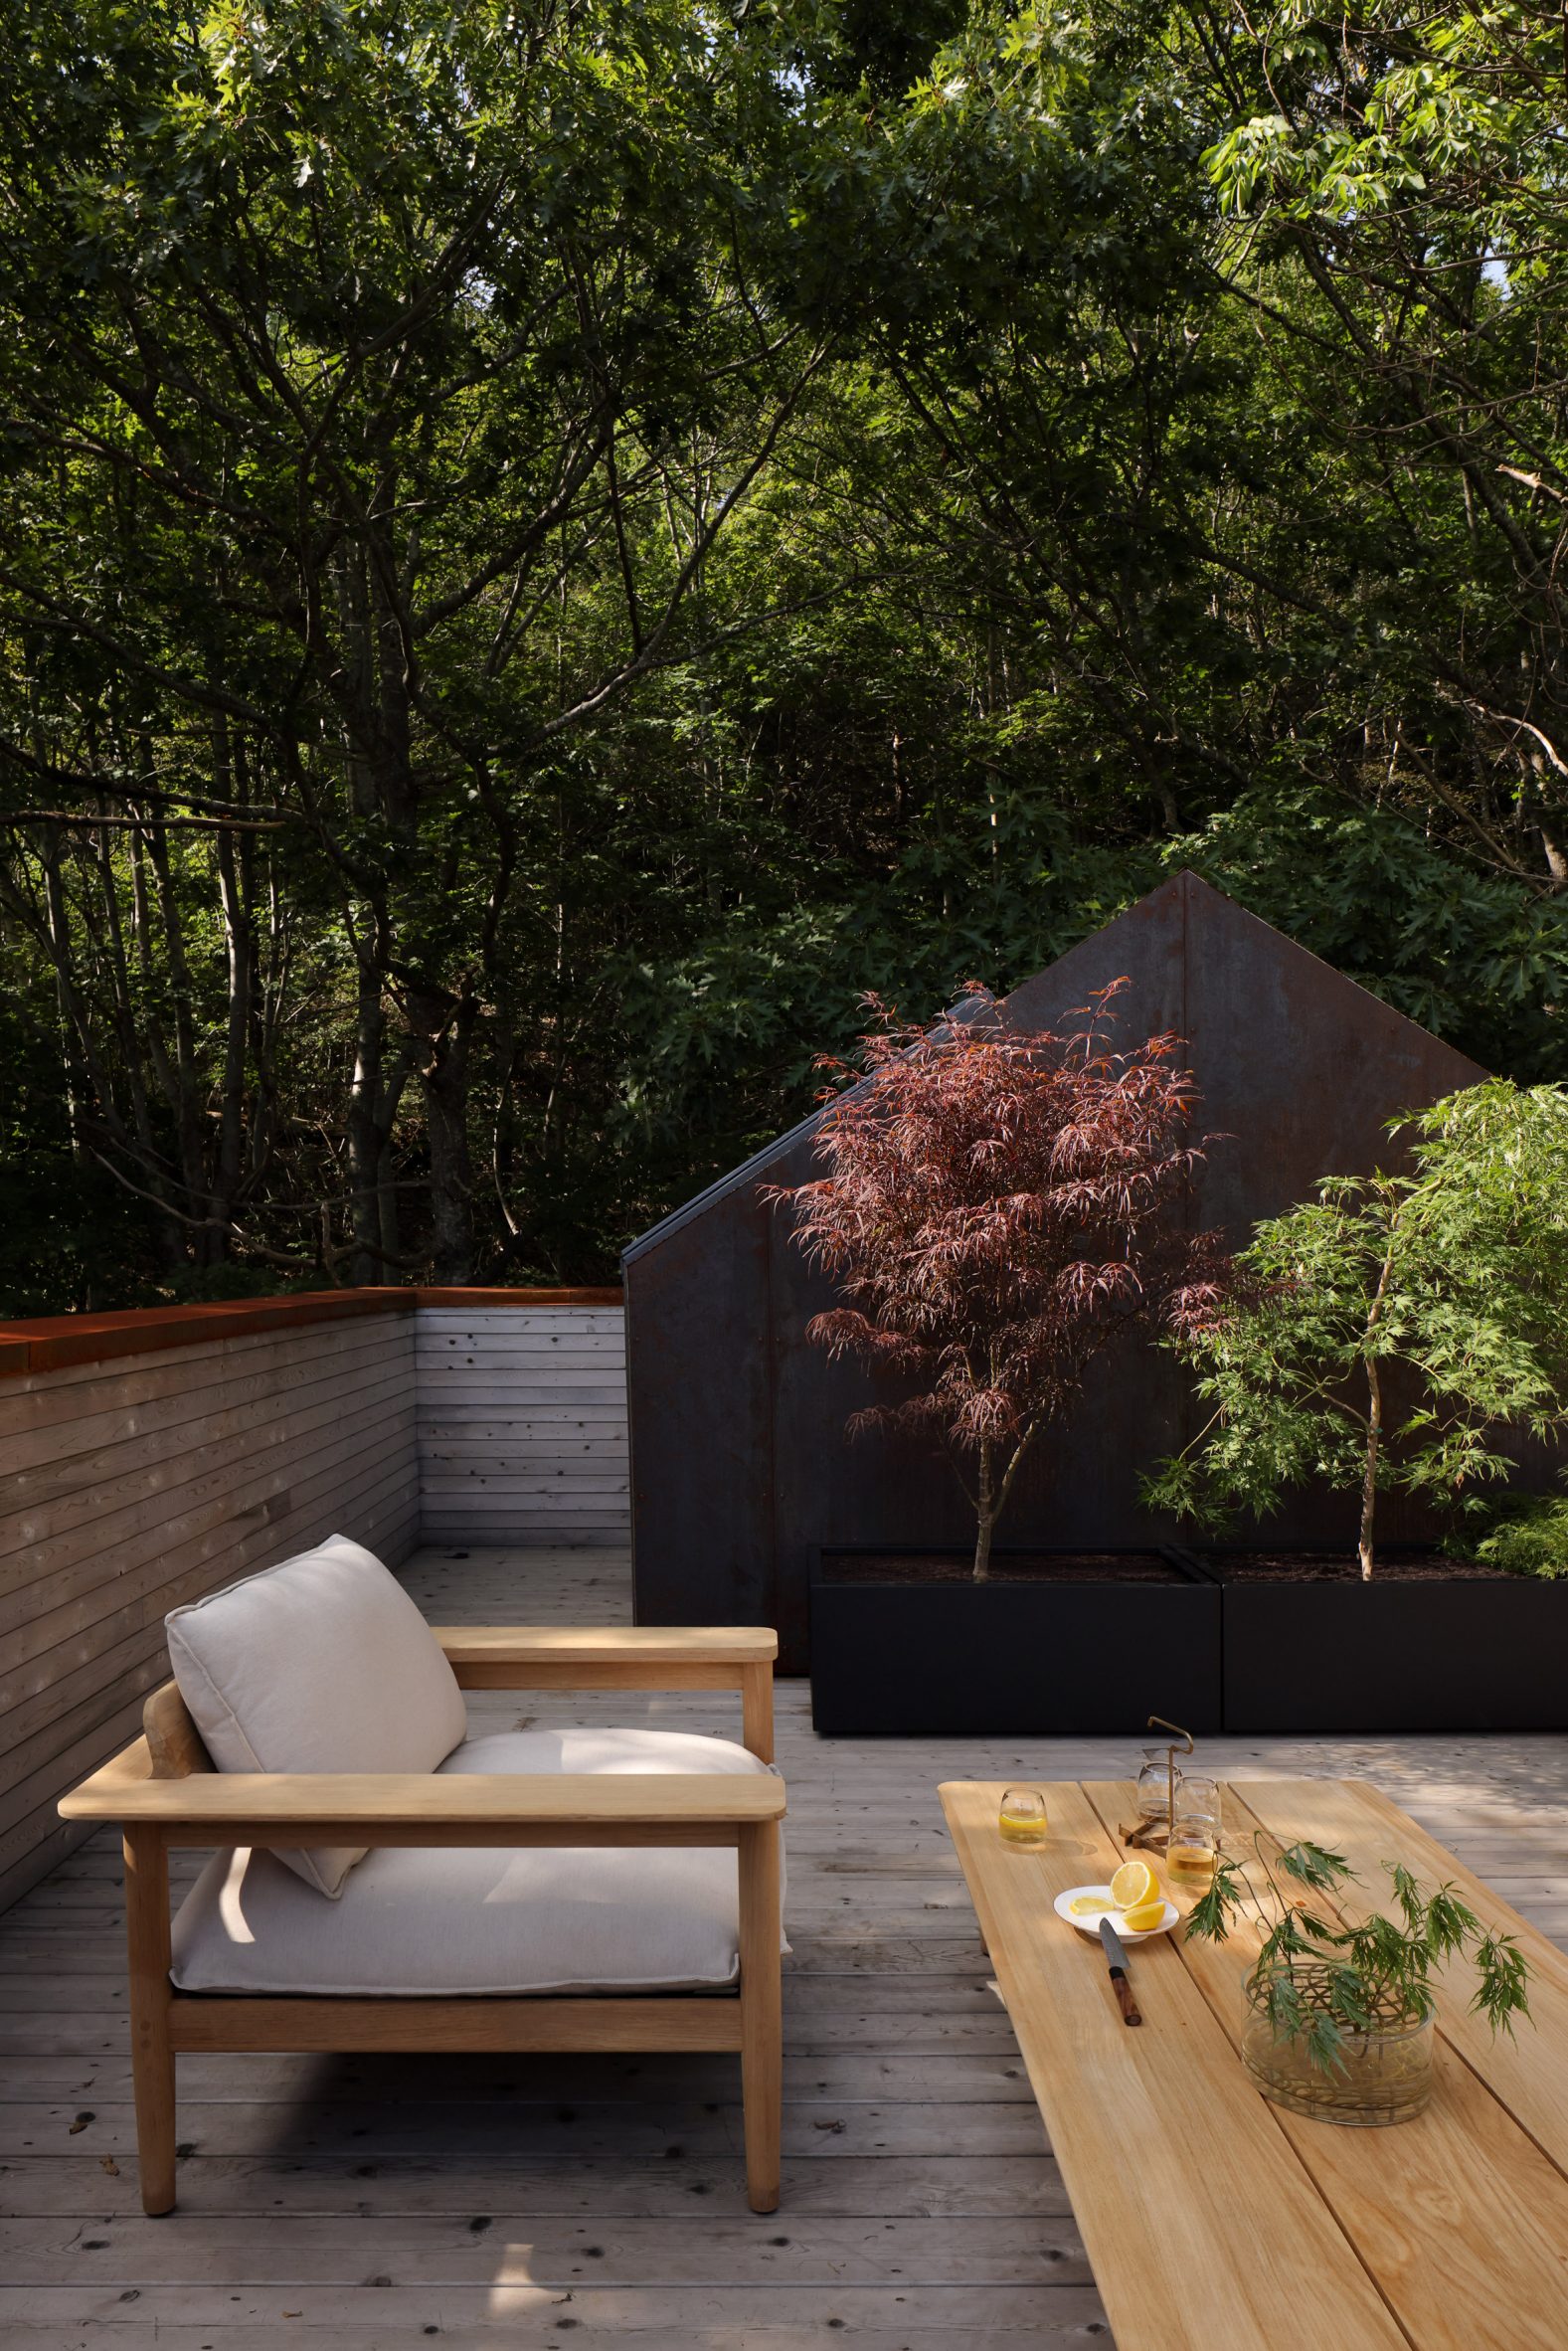 Rooftop patio with wooden furniture and forest in background